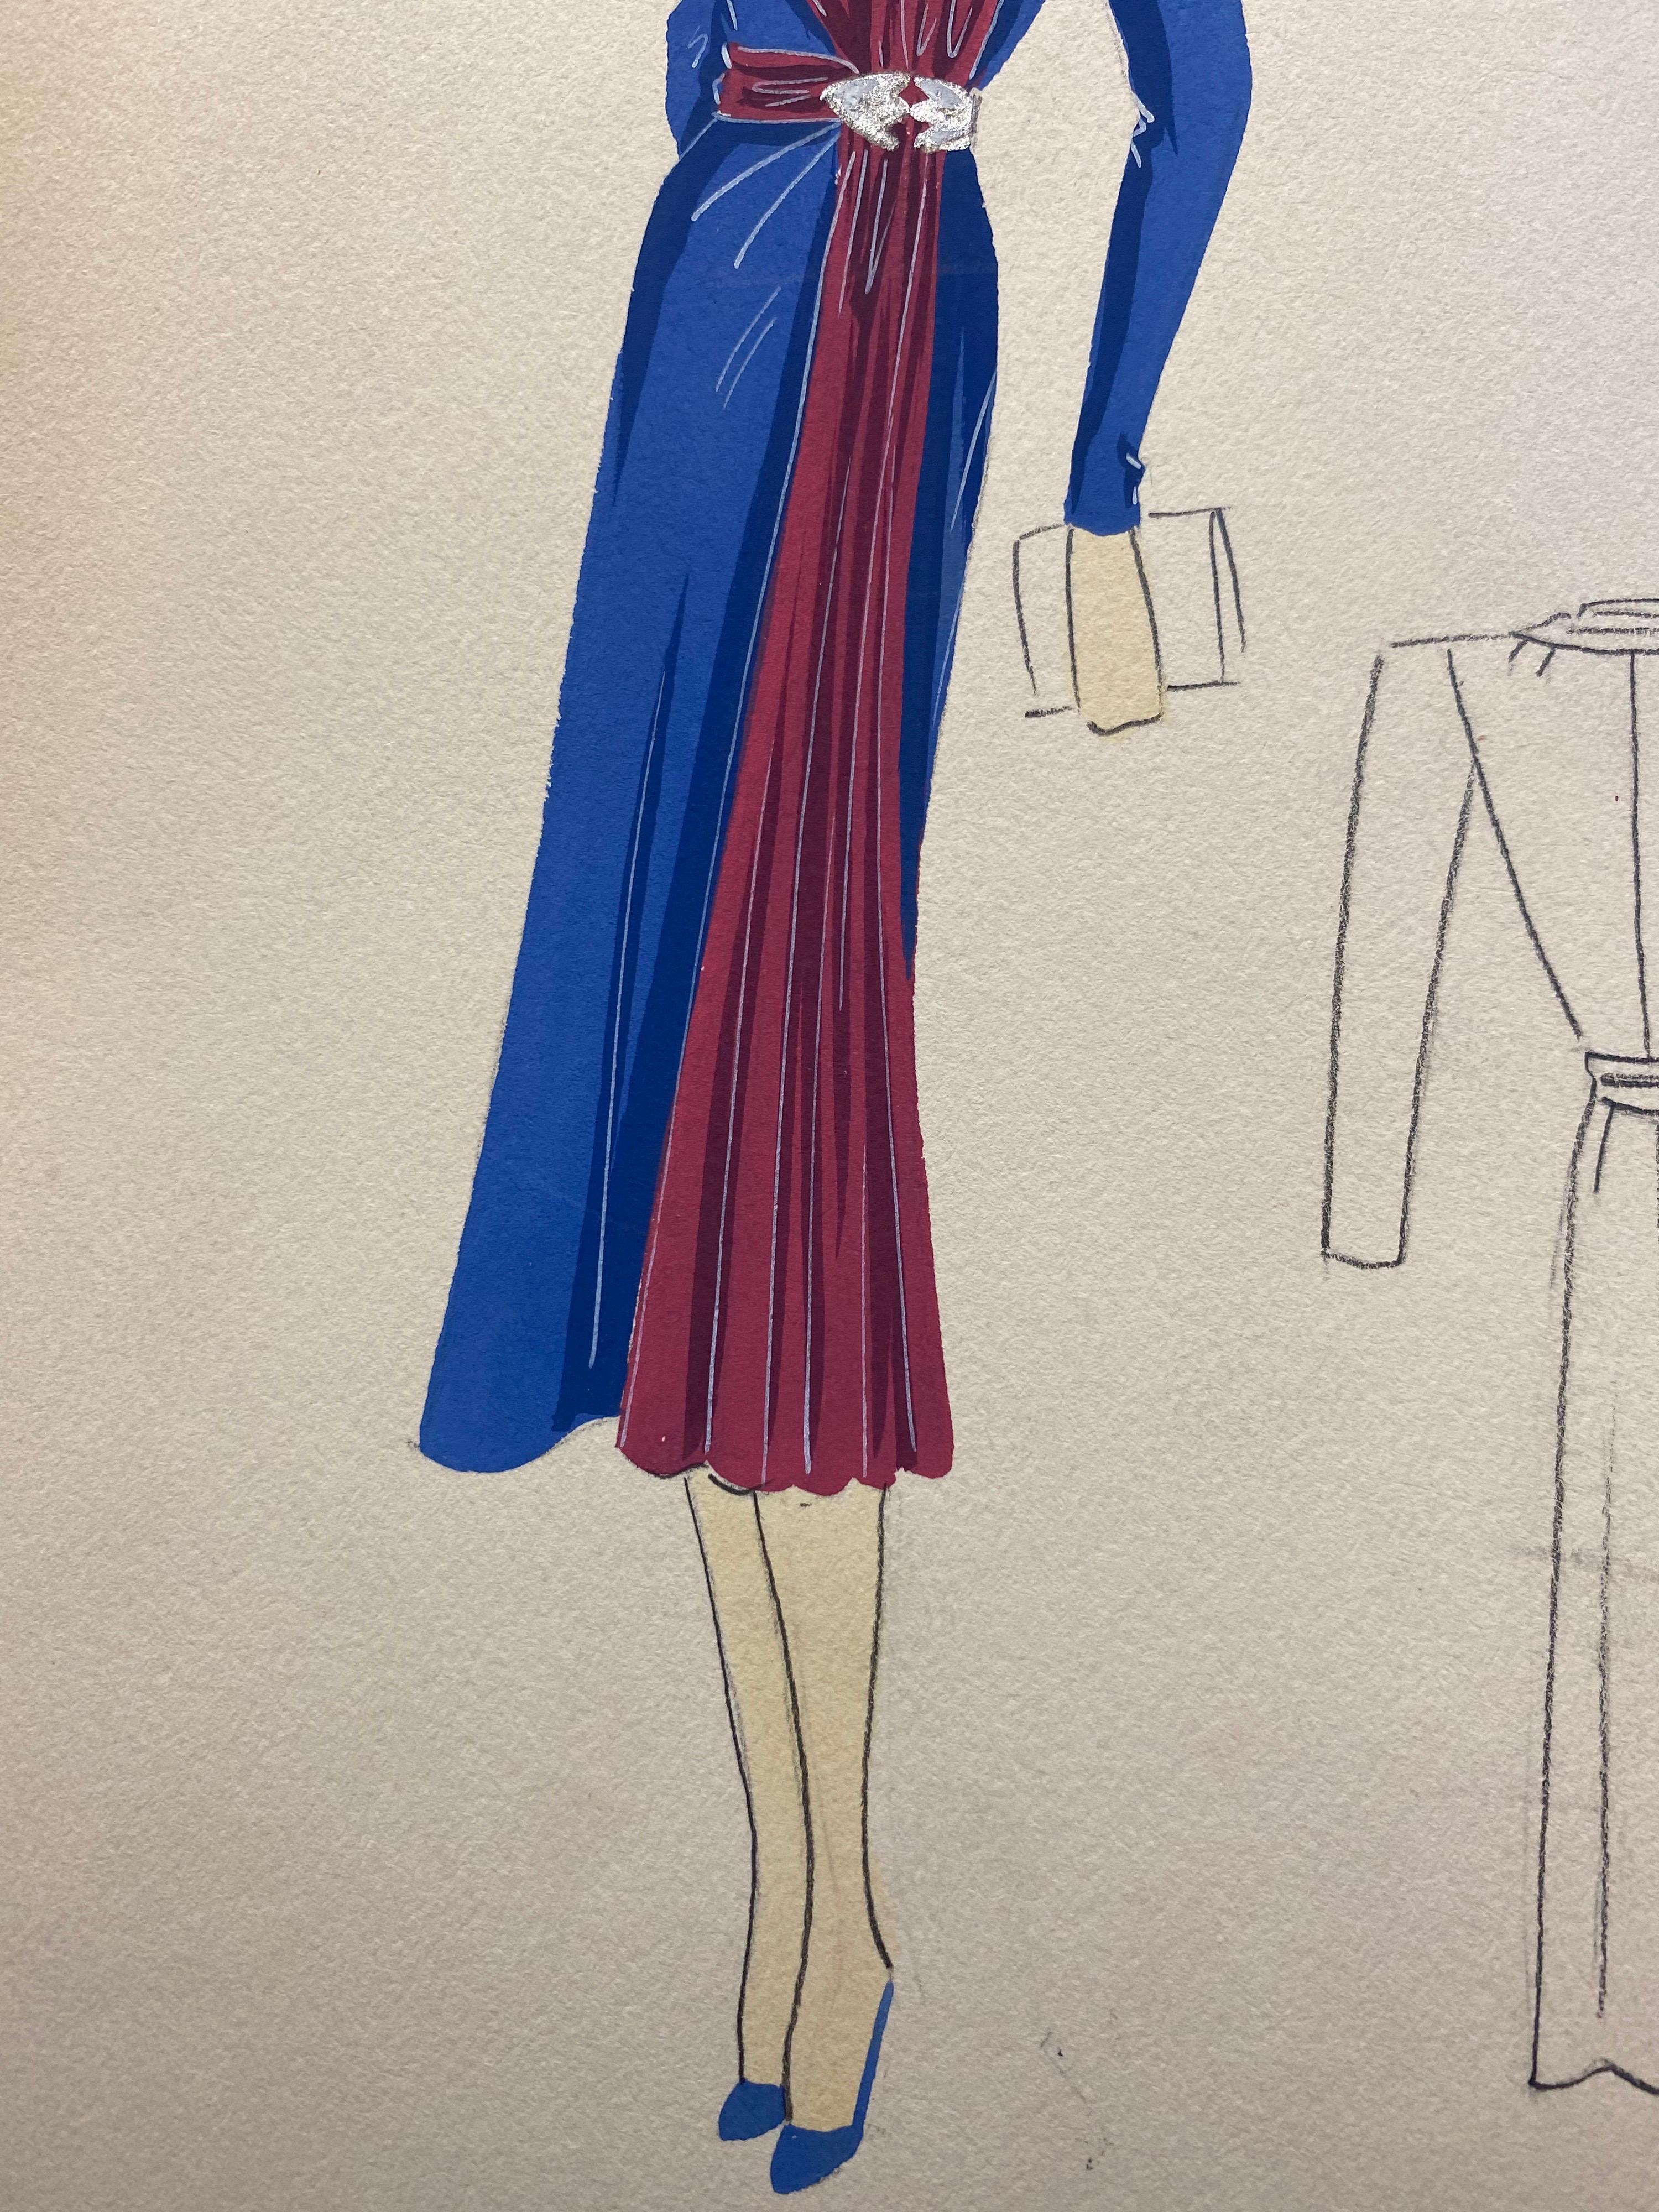 Other 1930's Original Parisian Fashion Illustration Watercolor Pink and Blue Dress For Sale